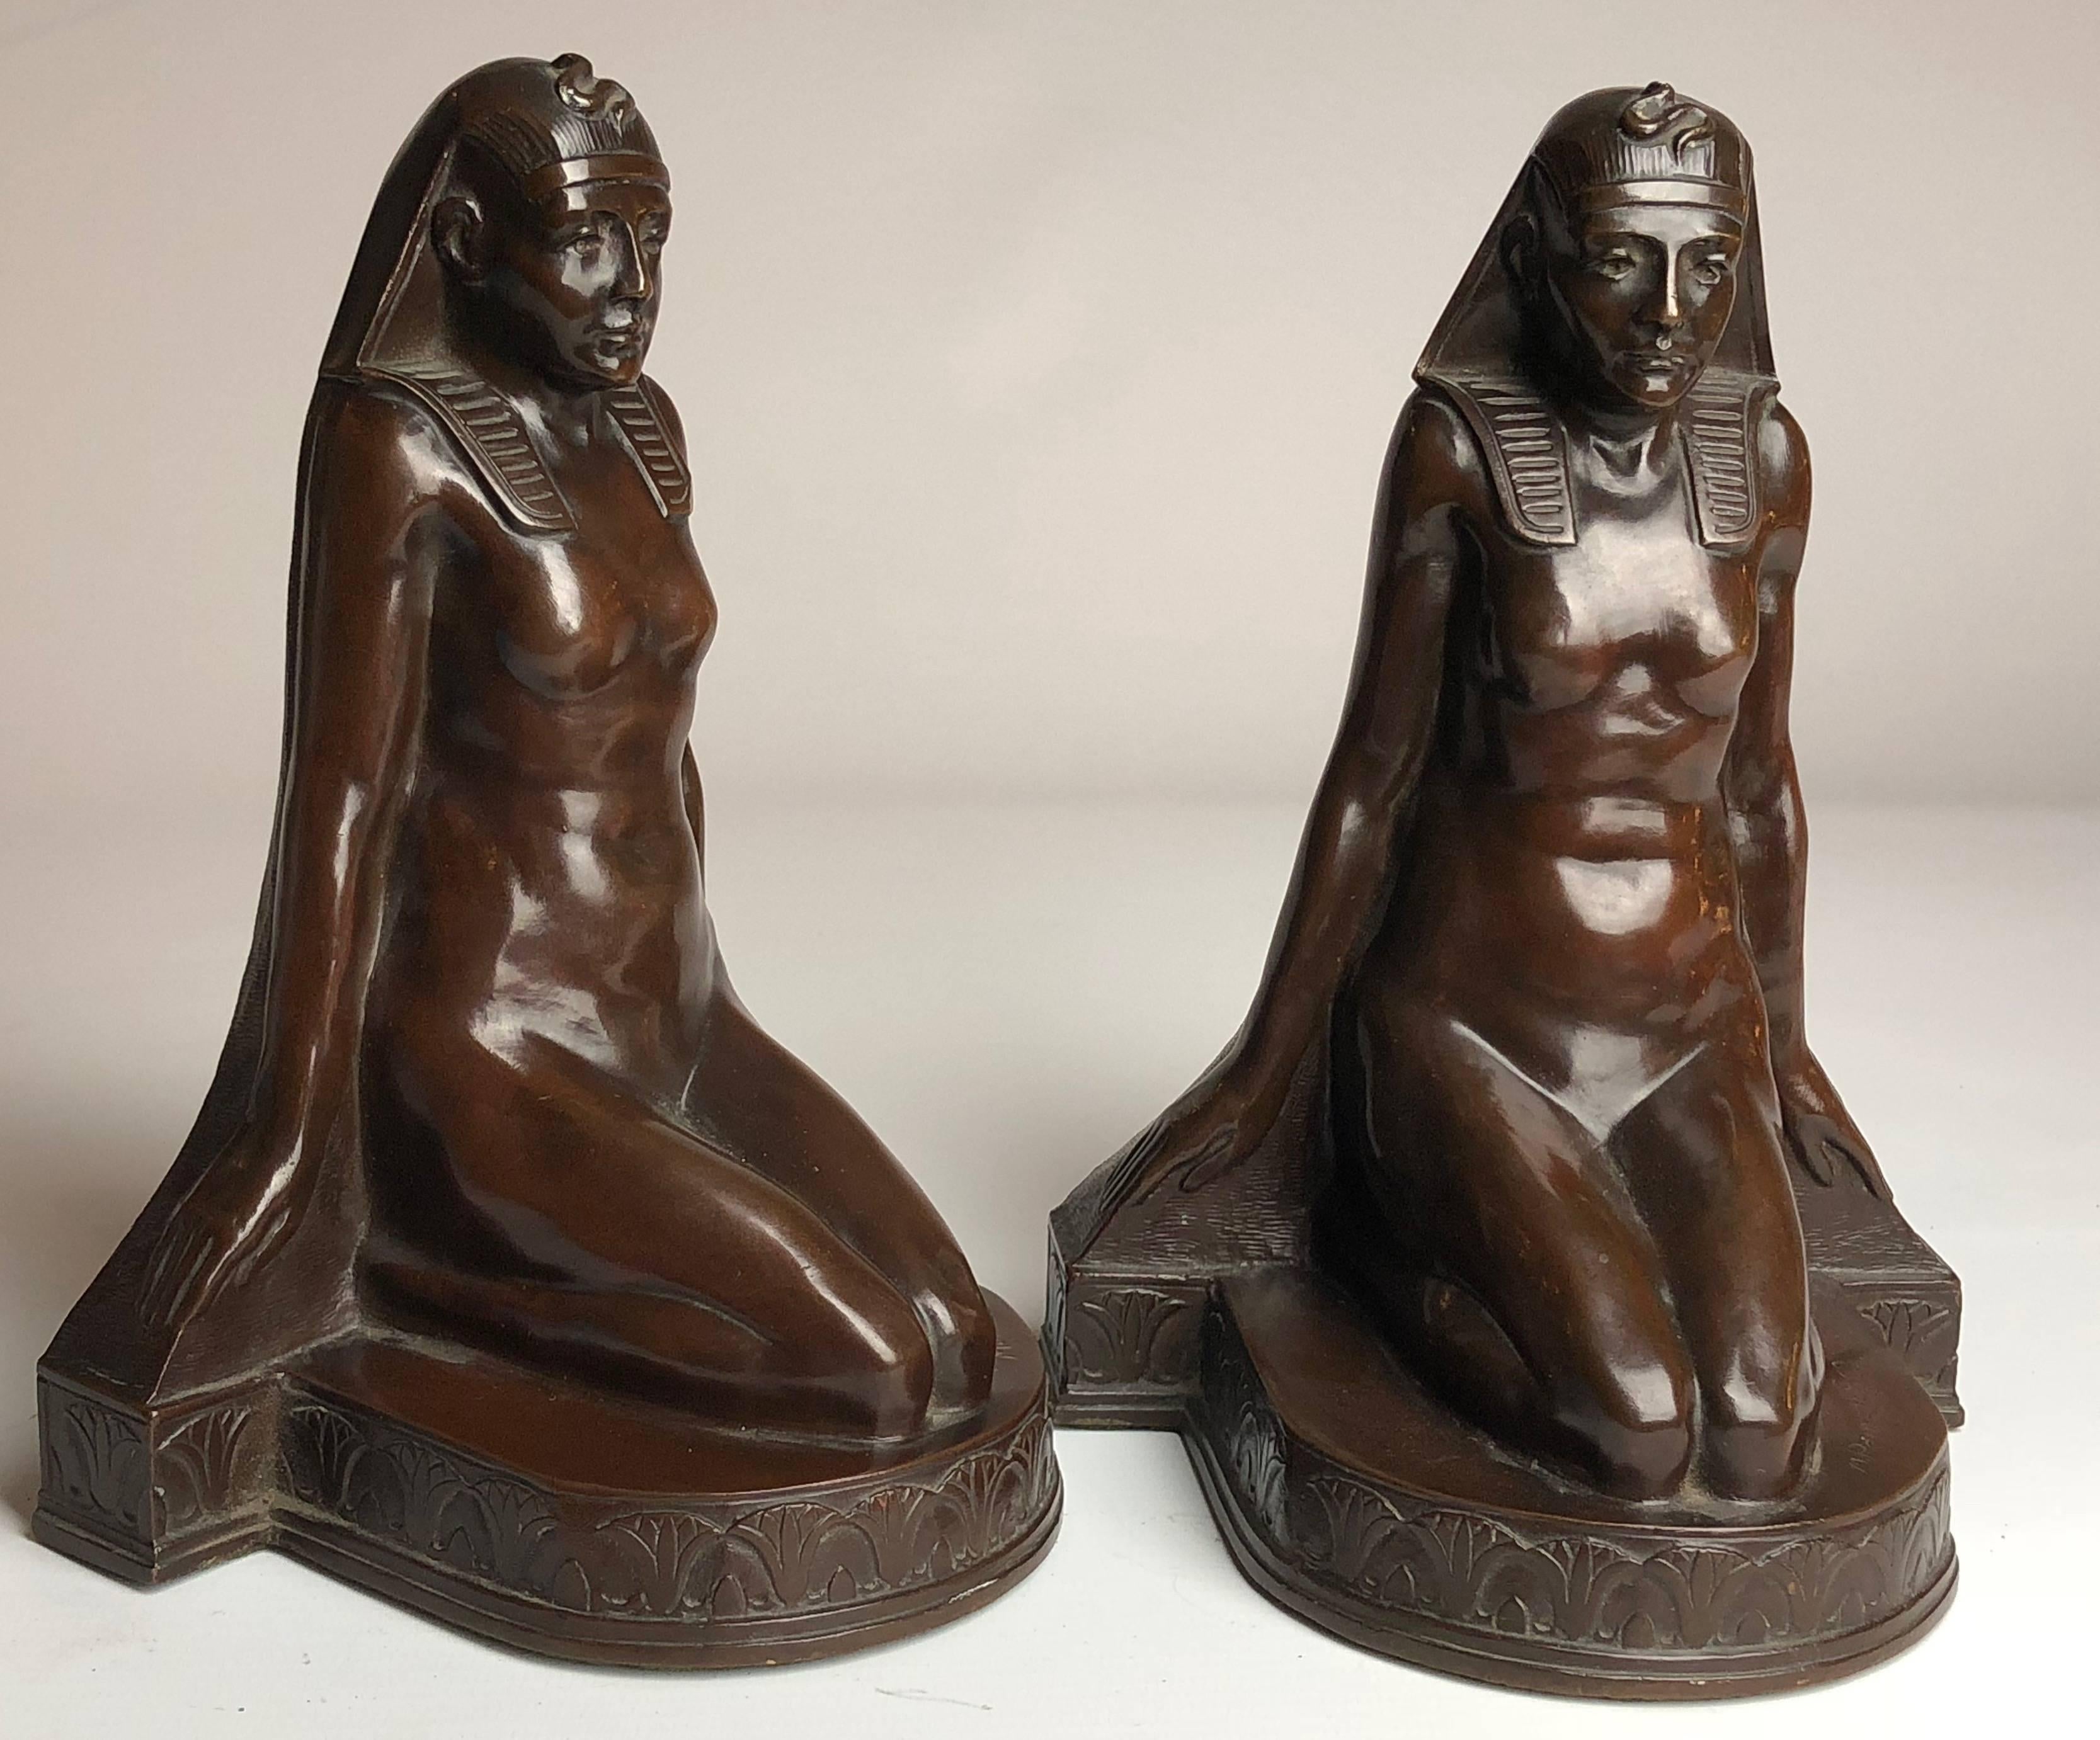 A fine pair of bookends styled in an Egyptian revival style by the New York company of Theodore B Starr, Both signed to the rear 

These bookends stand just under 8